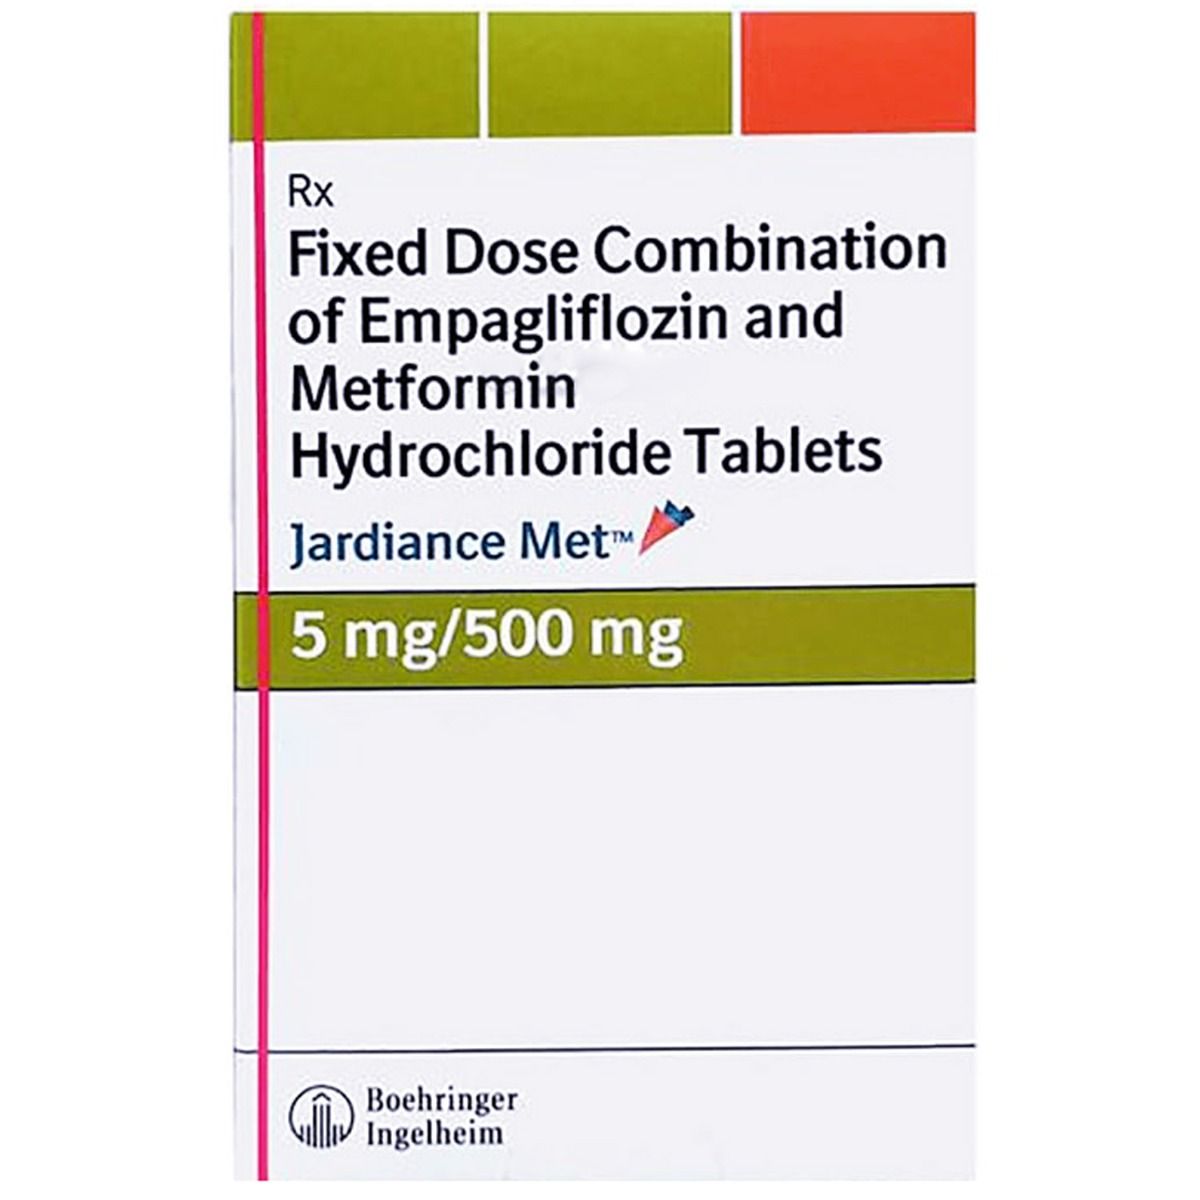 Jardiance Met 5 mg/500 mg Tablet 10's Price, Uses, Side Effects